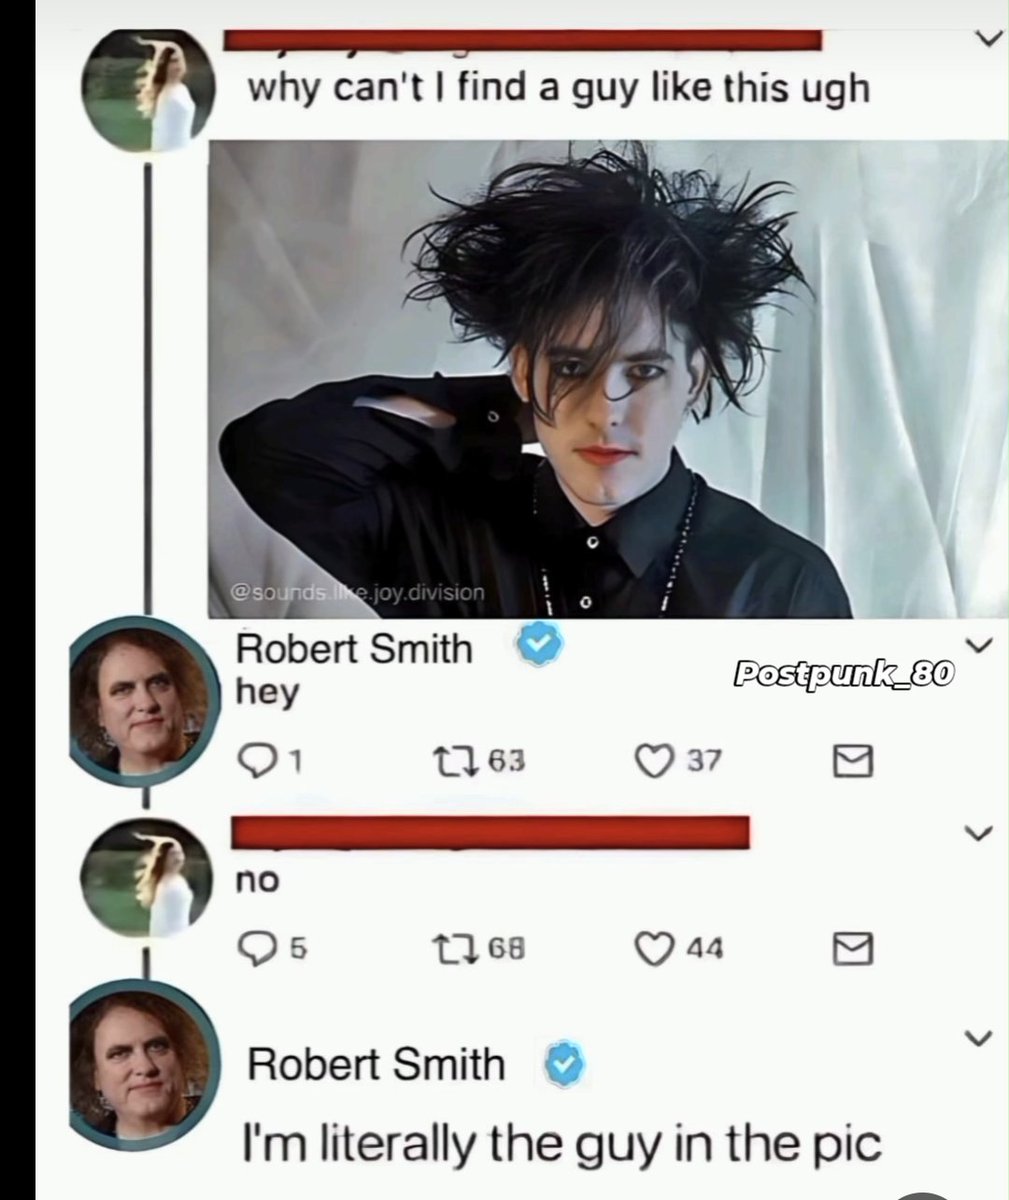 You tell her, Robert!!! 👌
#thecure #robertsmith